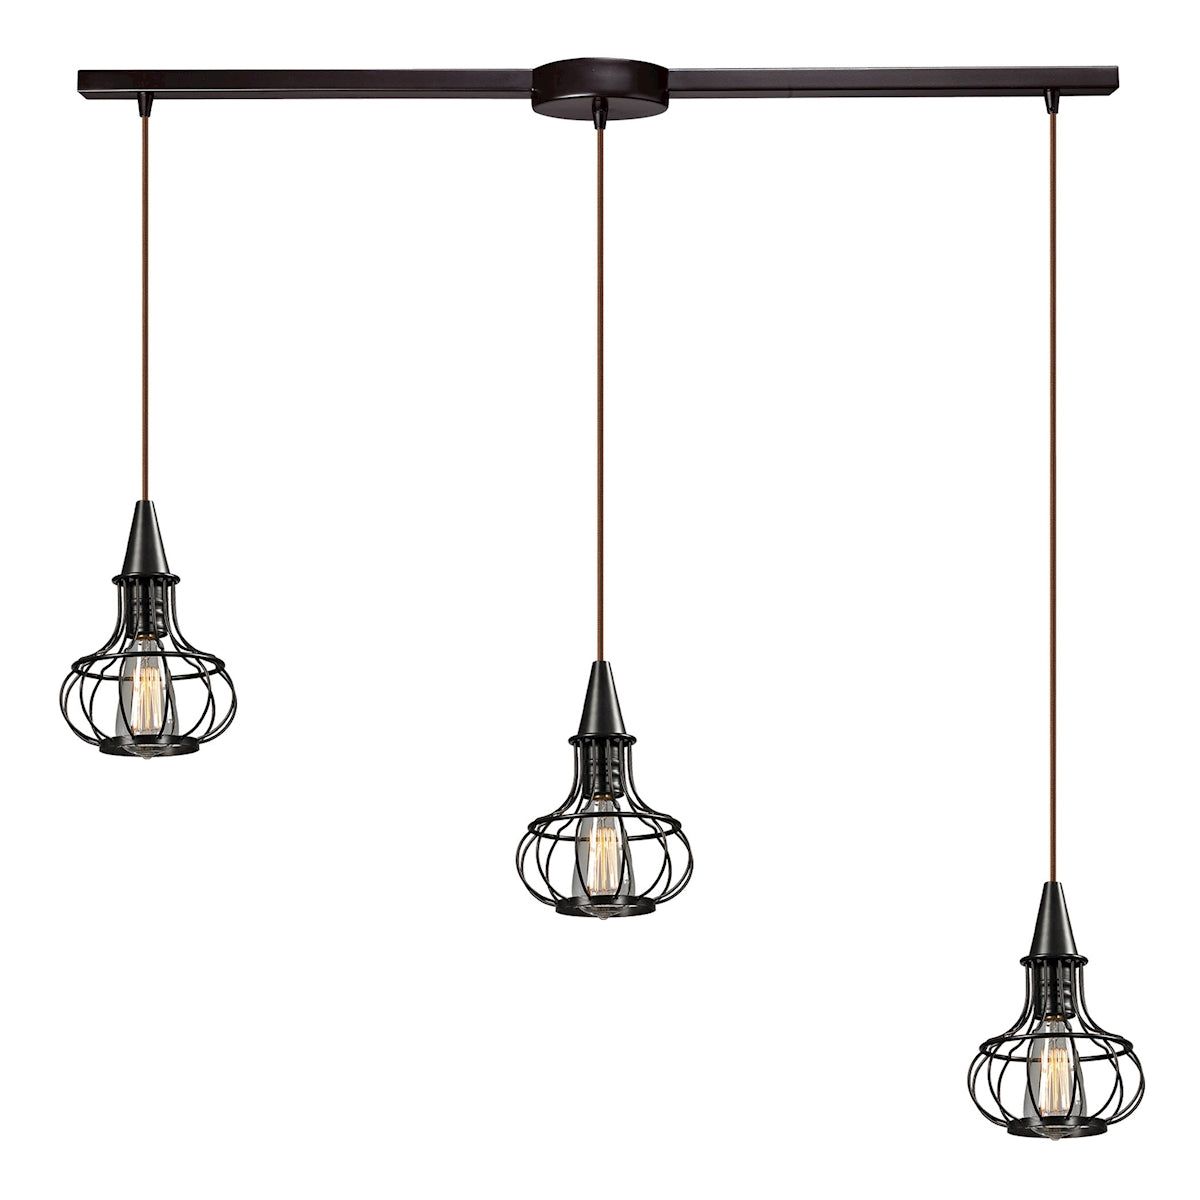 ELK Lighting 14191/3L Yardley 3-Light Linear Pendant Fixture in Oil Rubbed Bronze with Wire Cages